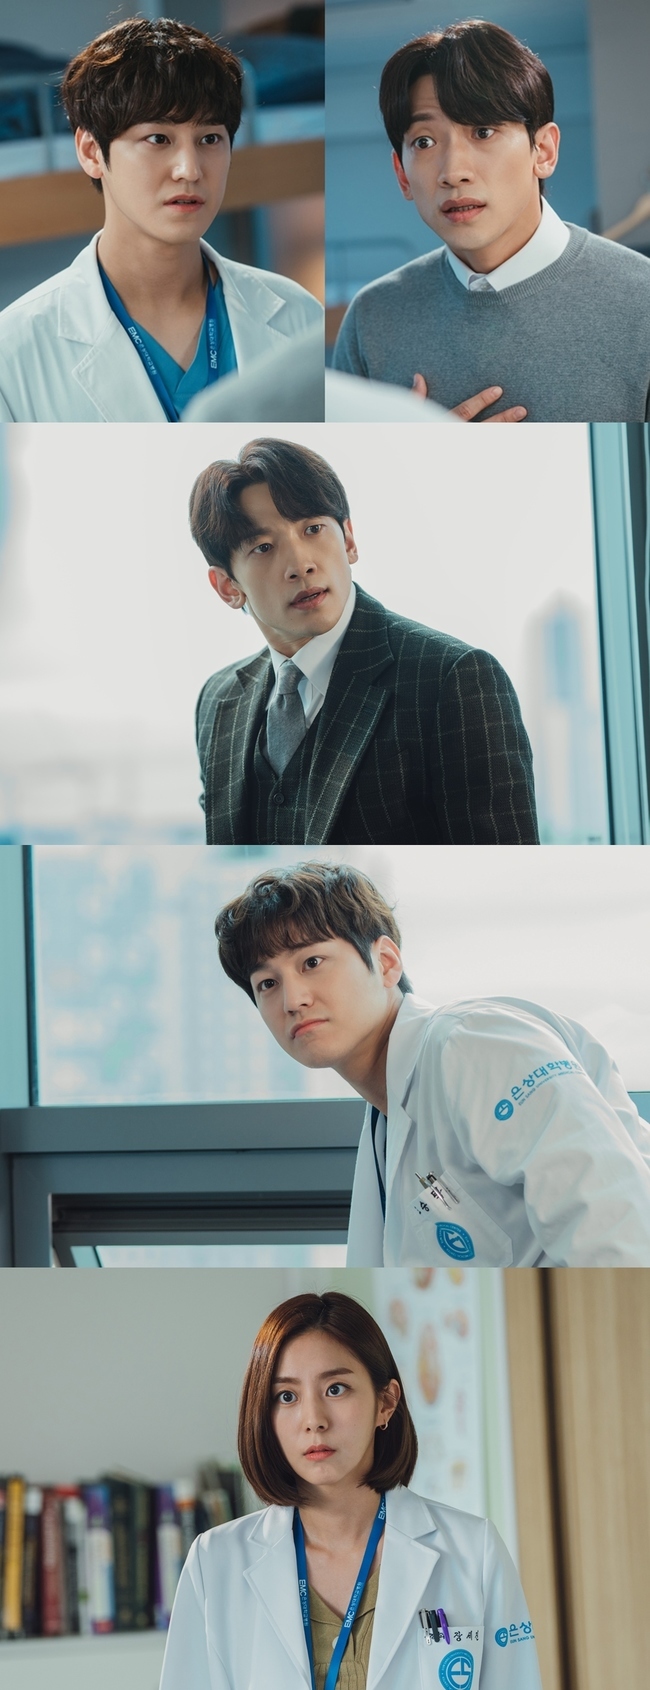 Rain and Kim Bum of Ghost Doctor show off Tom and Jerry Chemie, who are tit-for-tat when they get a break.In the 5th episode of the TVN Monday drama Ghost Doctor (directed by Boo Sung-chul/playplayplayed by Kim Sun-su/production studio Dragon, Bon Factory), which airs at 10:30 p.m. on January 17, a childish fight will take place between Rain (played by Cha Young-min) and Kim Bum (played by Ko Seung-tak).Earlier, Ko Seung-tak had surgery on behalf of An, who had injured his hand.Cha Young-min, who found out that it was a situation made up of a conspiracy between An Taihun and Han Seung-won (Tae In-ho), is also angry.Ko Seung-tak came into the operating room and told Cha Young-min, who gave him a chance to live, Lets save the patient, Mr. Cha Young-min, and he revealed that he was seen as a ghost.SteelSeries, which was unveiled on the 17th, was caught by Cha Young-min, who had a look of something, and a combination of injustice and surprise.It raises curiosity about why the two people who are developing into an inseparable relationship between Bingui and reception showed a conflicting reaction.In another Steel Series, Cha Young-min is frowning and embarrassed, while Ko Seung-tak is making a humorous look with a close-up look.In particular, they are waiting for the broadcast that they are fighting a childish fight and are facing an unexpected catastrophe.Jang Se-jin (Yui-Bun), who faced an unexpected situation here, is curious because he creates a big eye with absurdity and an atmosphere that seems to make no sense.